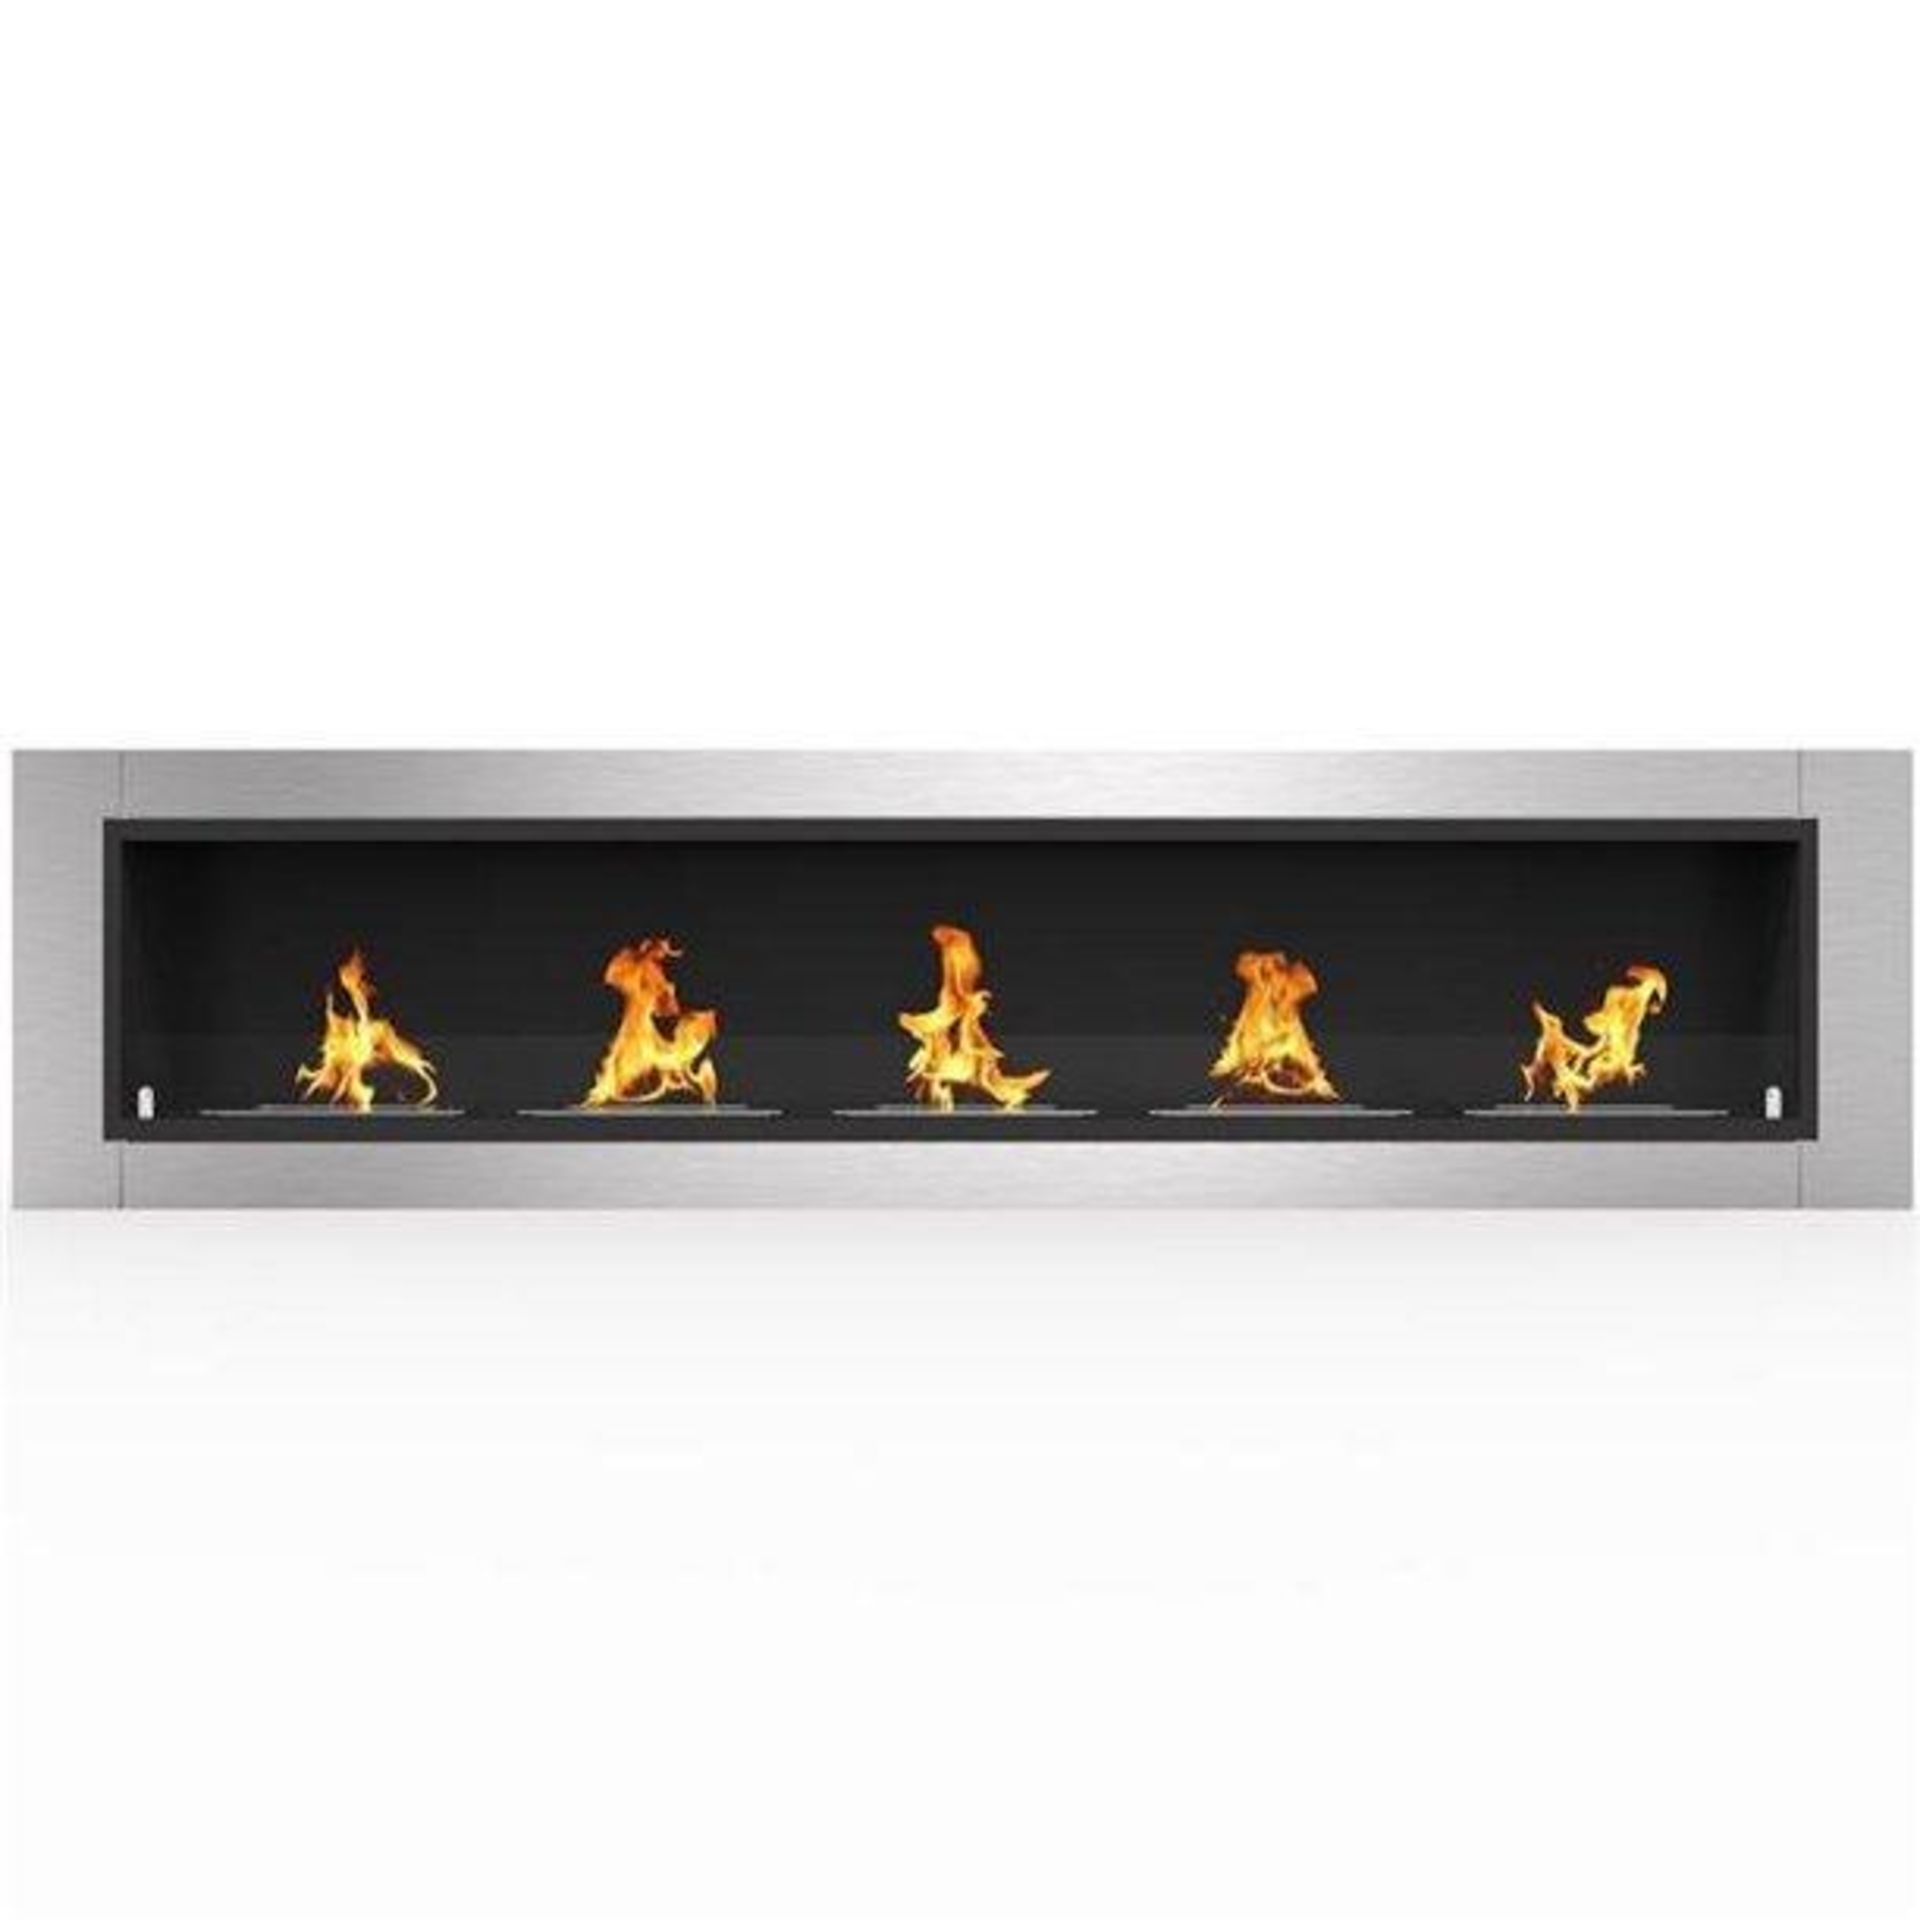 DESCRIPTION: 71" CAMBRIDGE VENTLESS BUILT-IN RECESSED BIO ETHANOL WALL MOUNTED FIREPLACE (NEW) BRAND